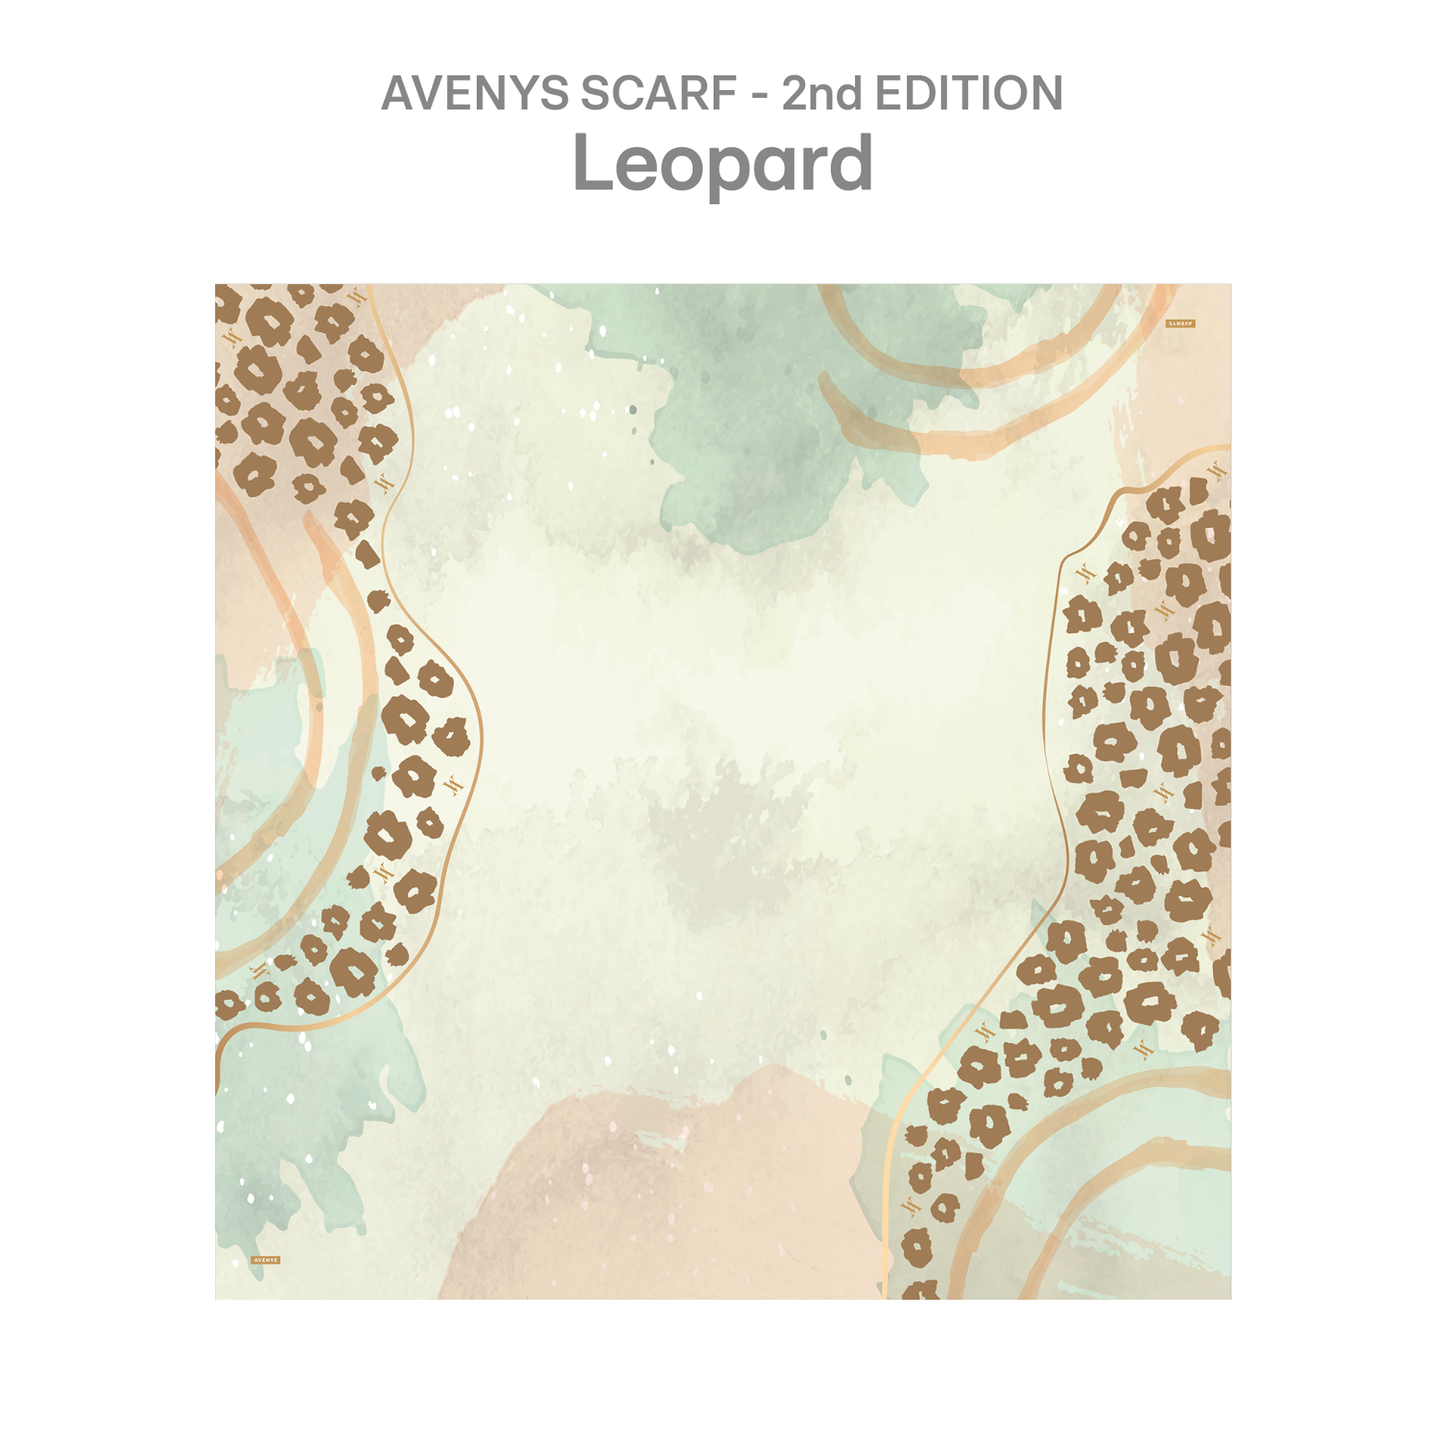 AVENYS Scarf (2nd Edition) - Leopard